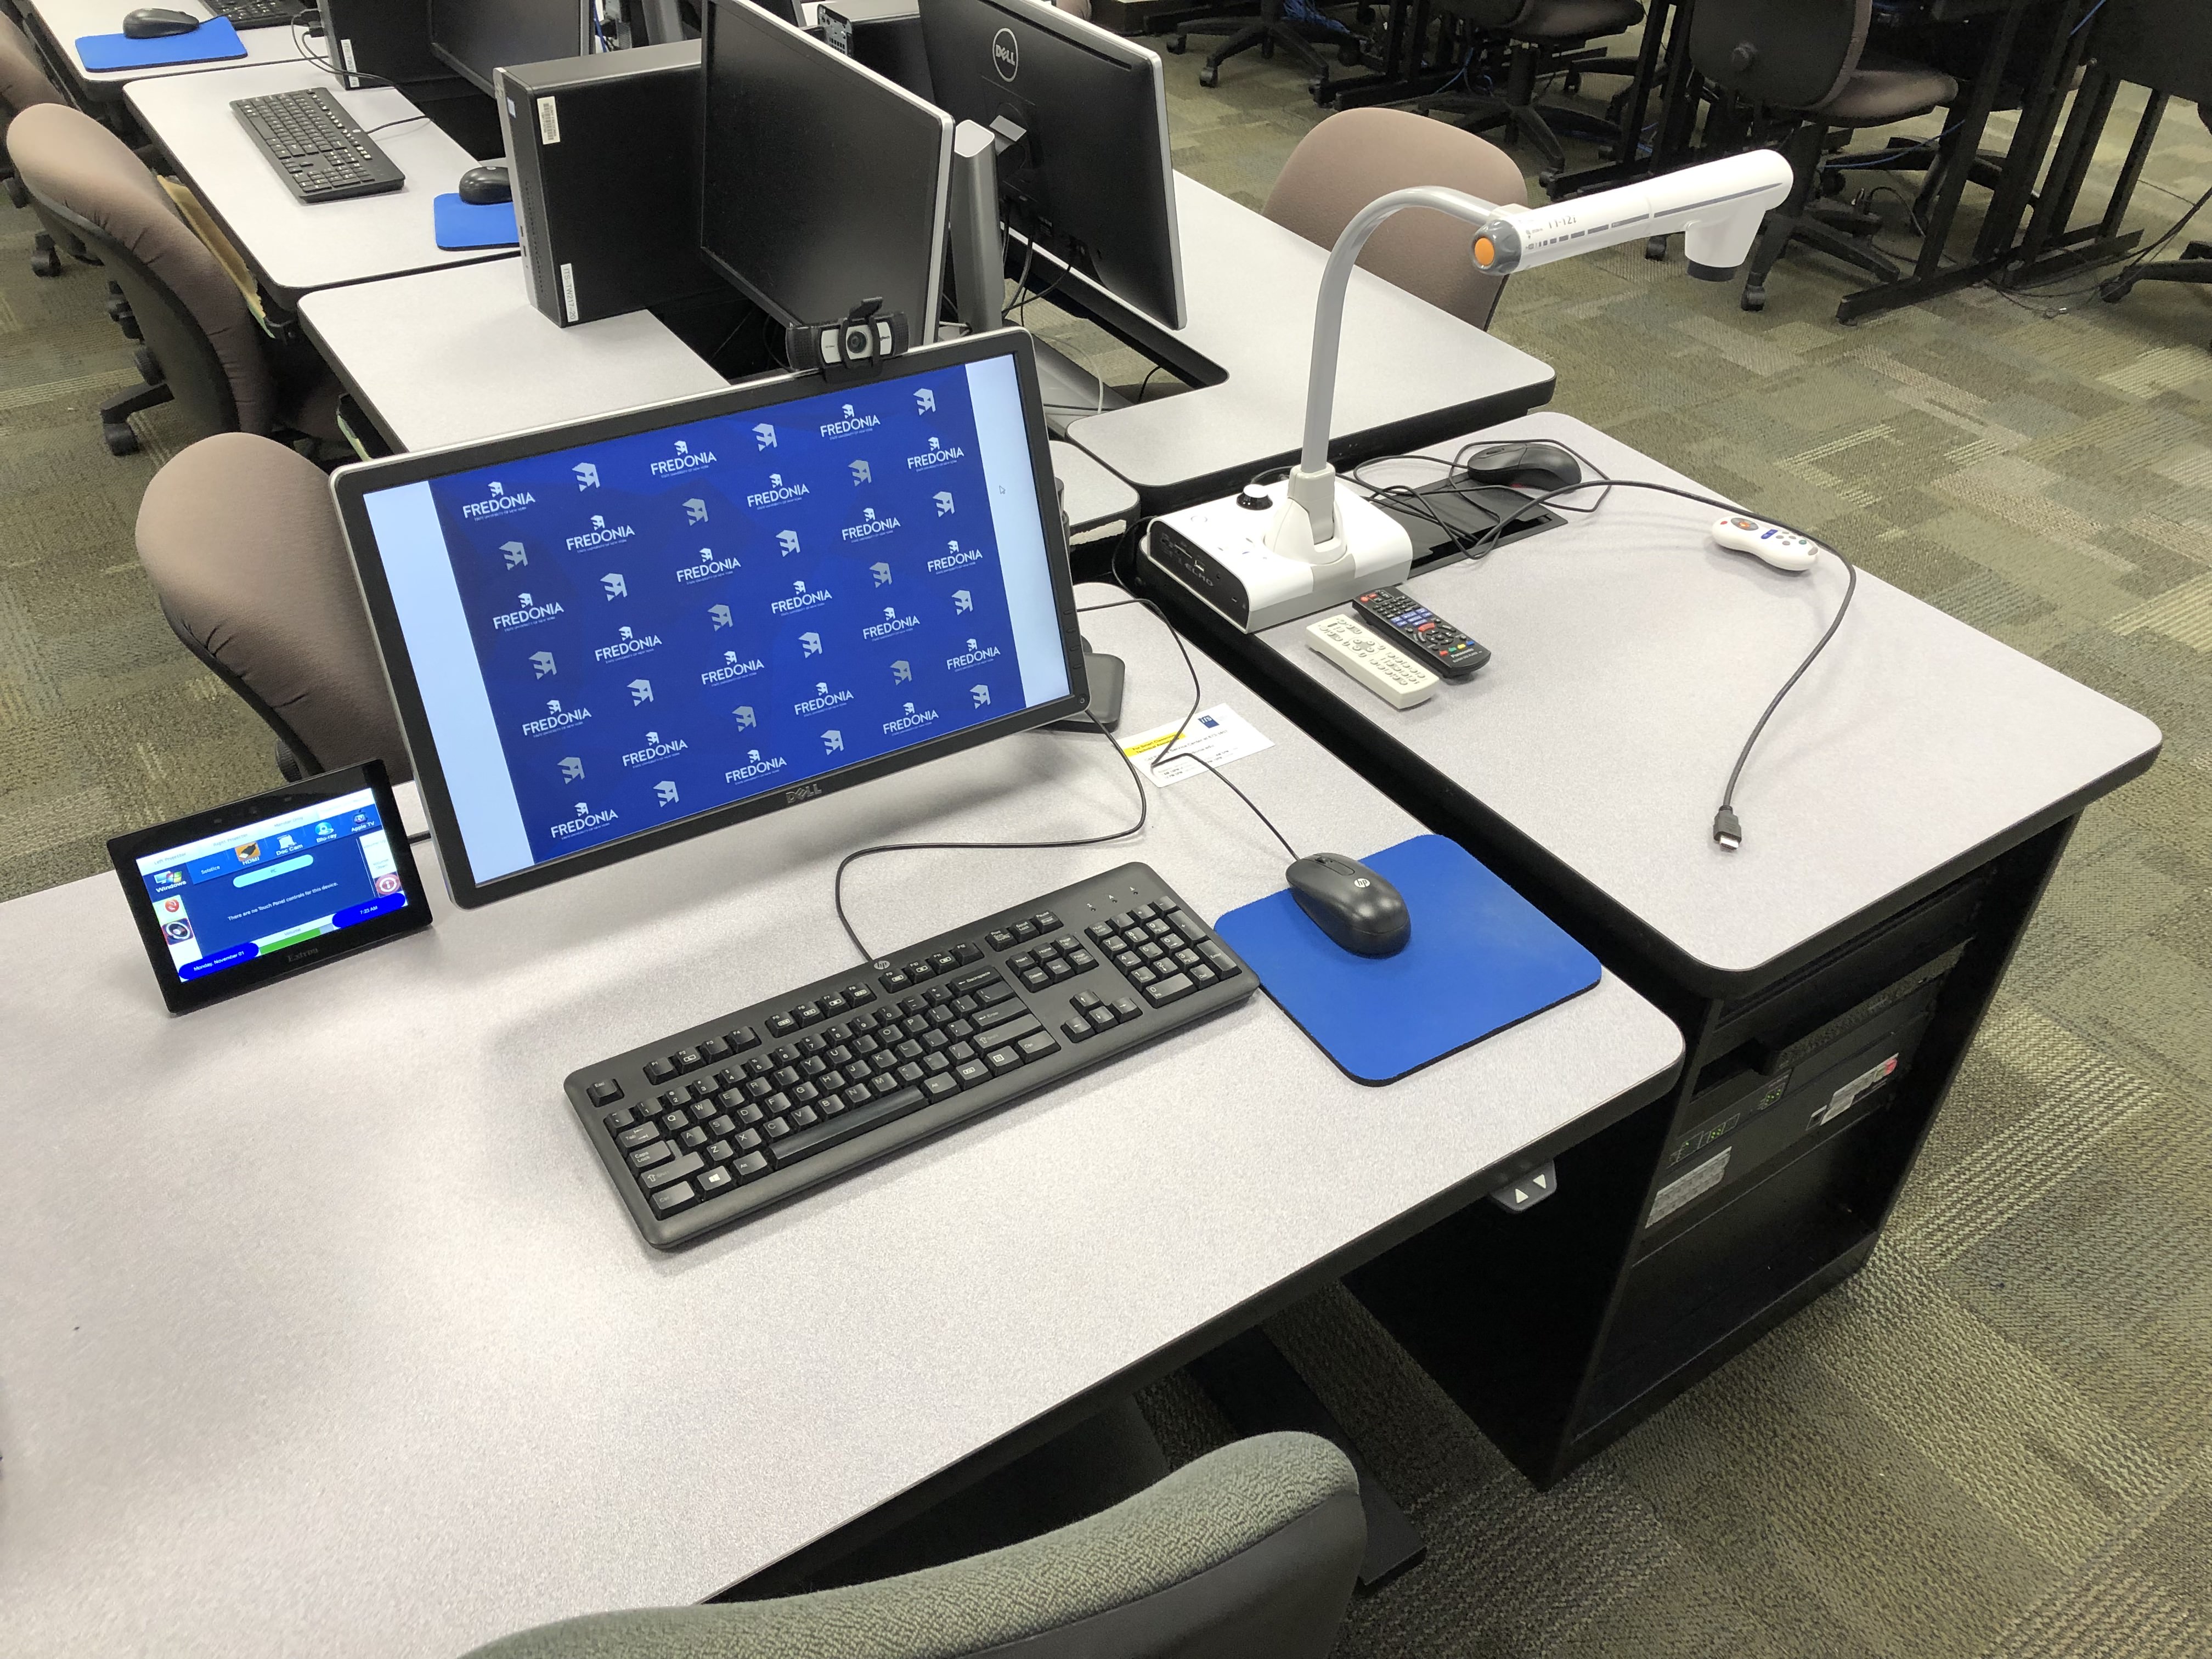 Example of a student computer desk.